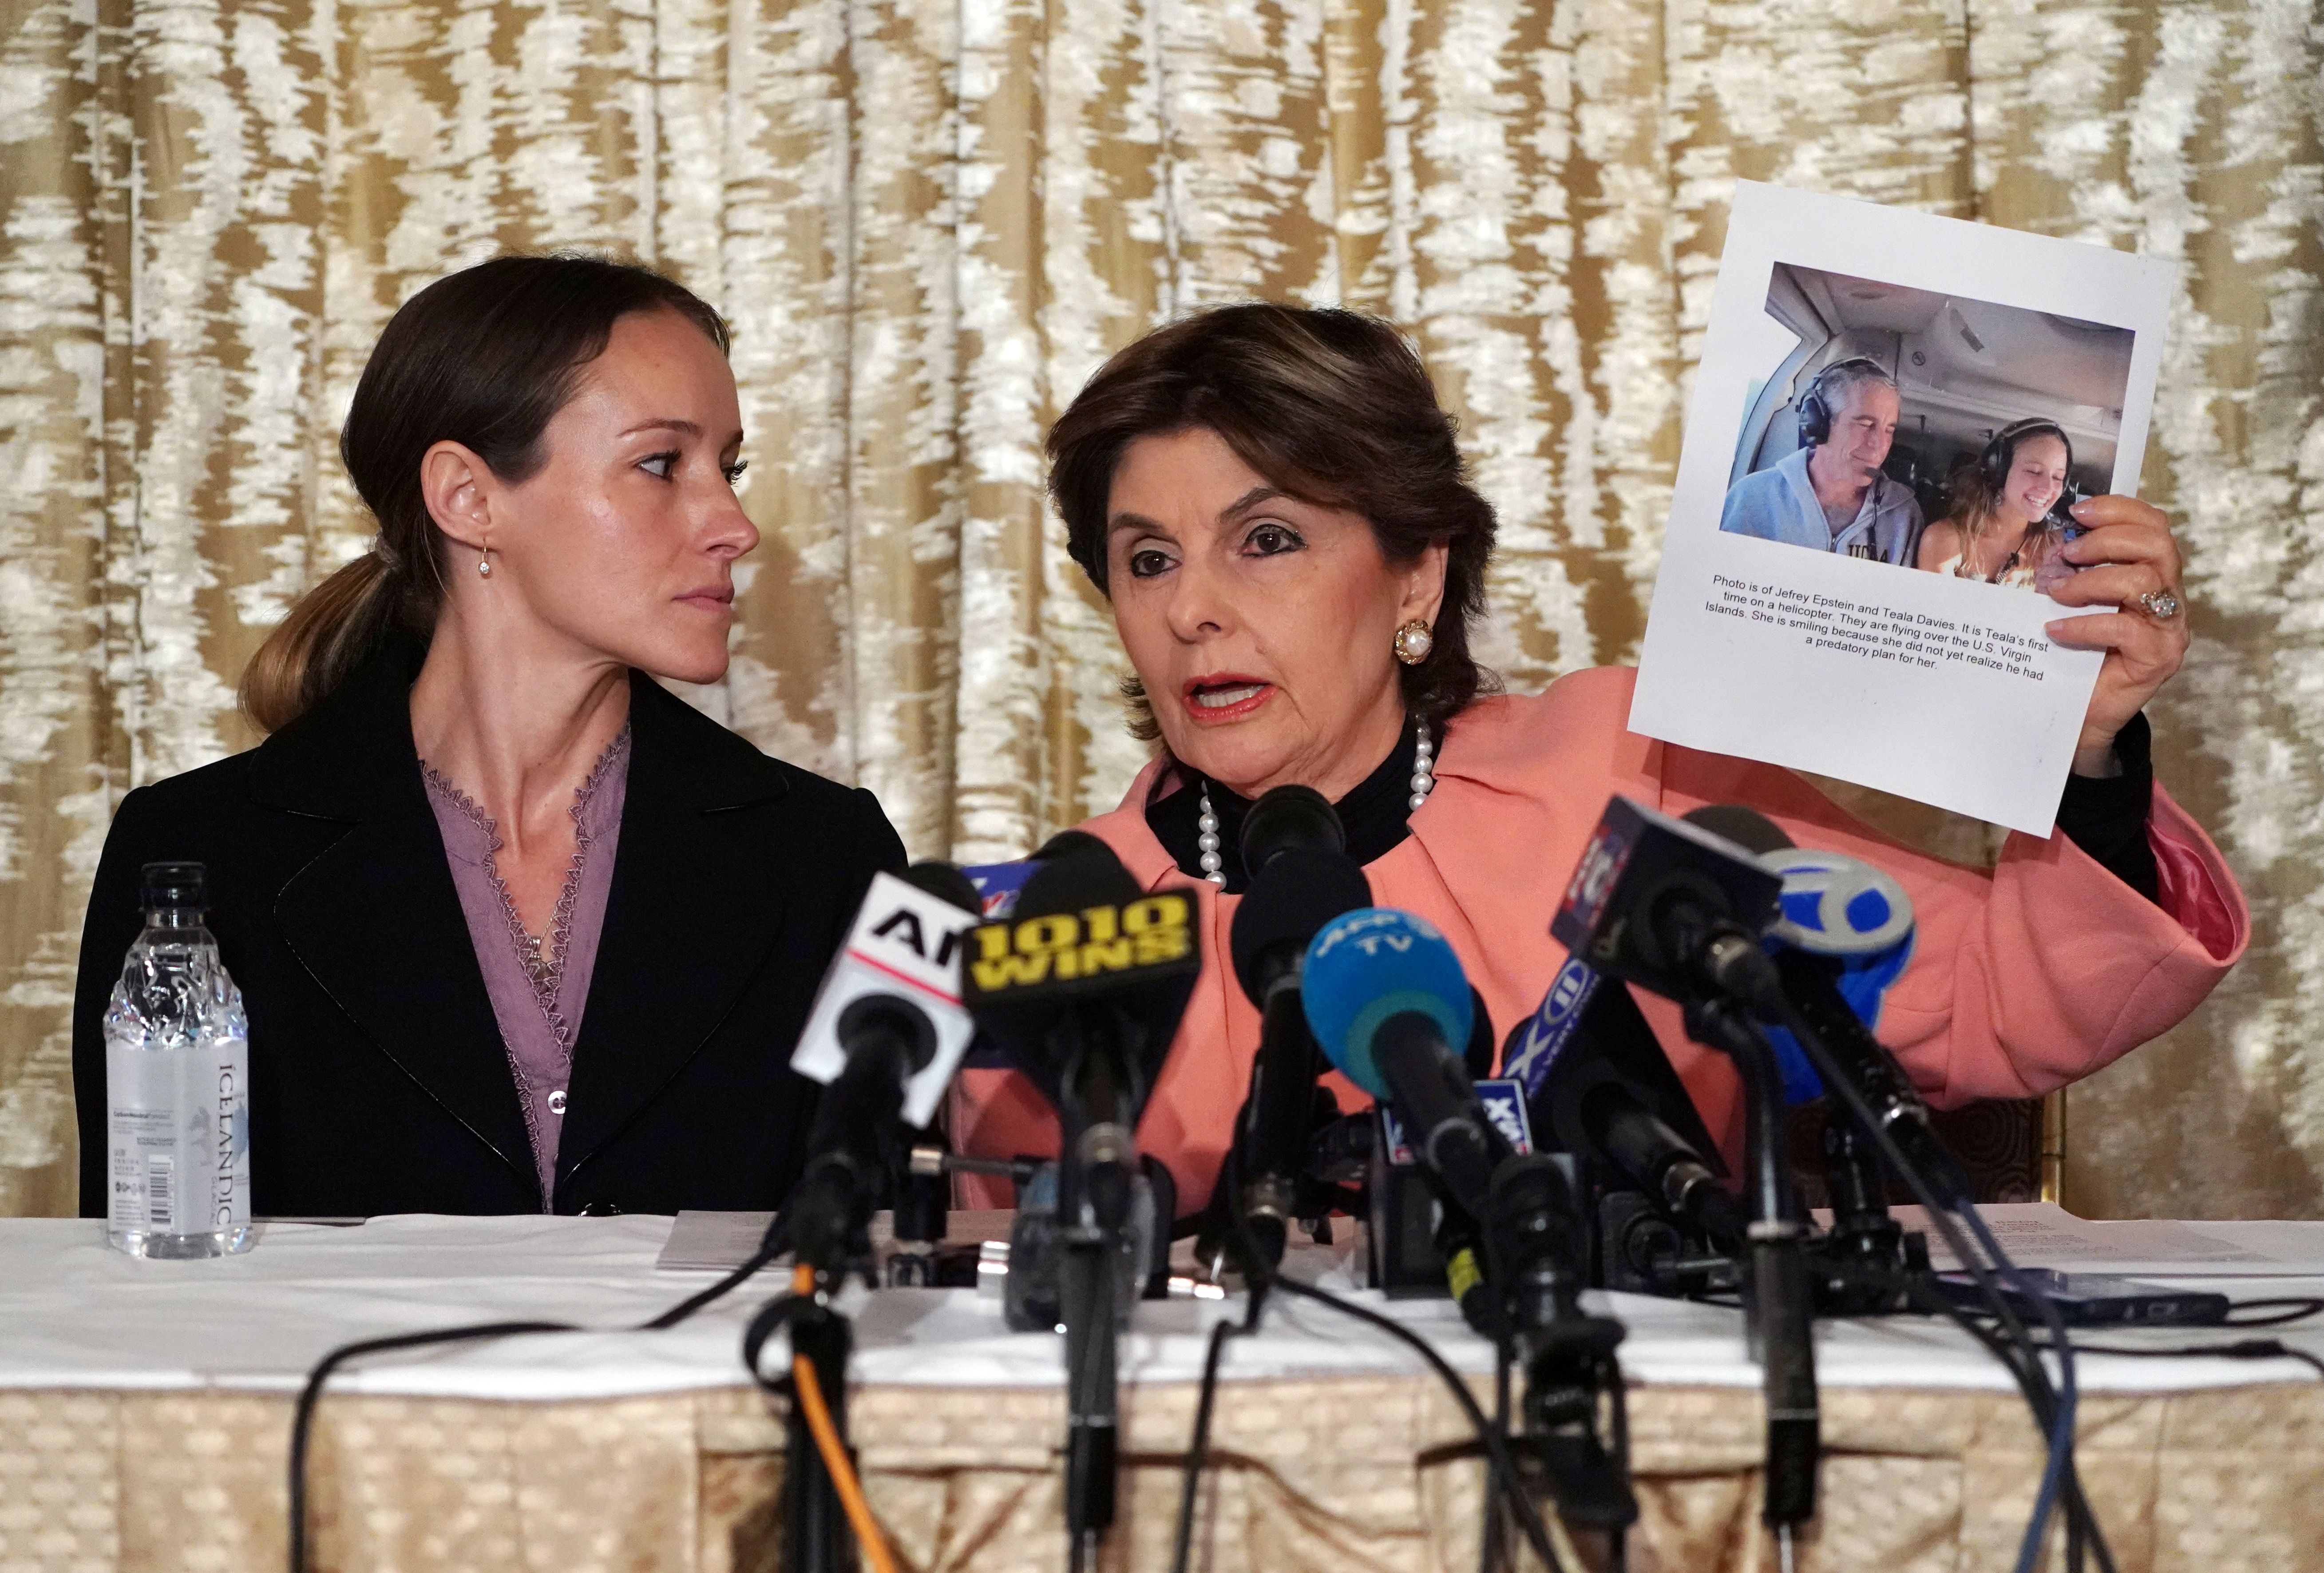 Attorney Gloria Allred (R) and her client Teala Davies, who claims to be a victim of sexual abuse by Jeffrey Epstein when she was a minor, hold a press conference in New York City on November 21, 2019. (TIMOTHY A. CLARY/AFP via Getty Images)